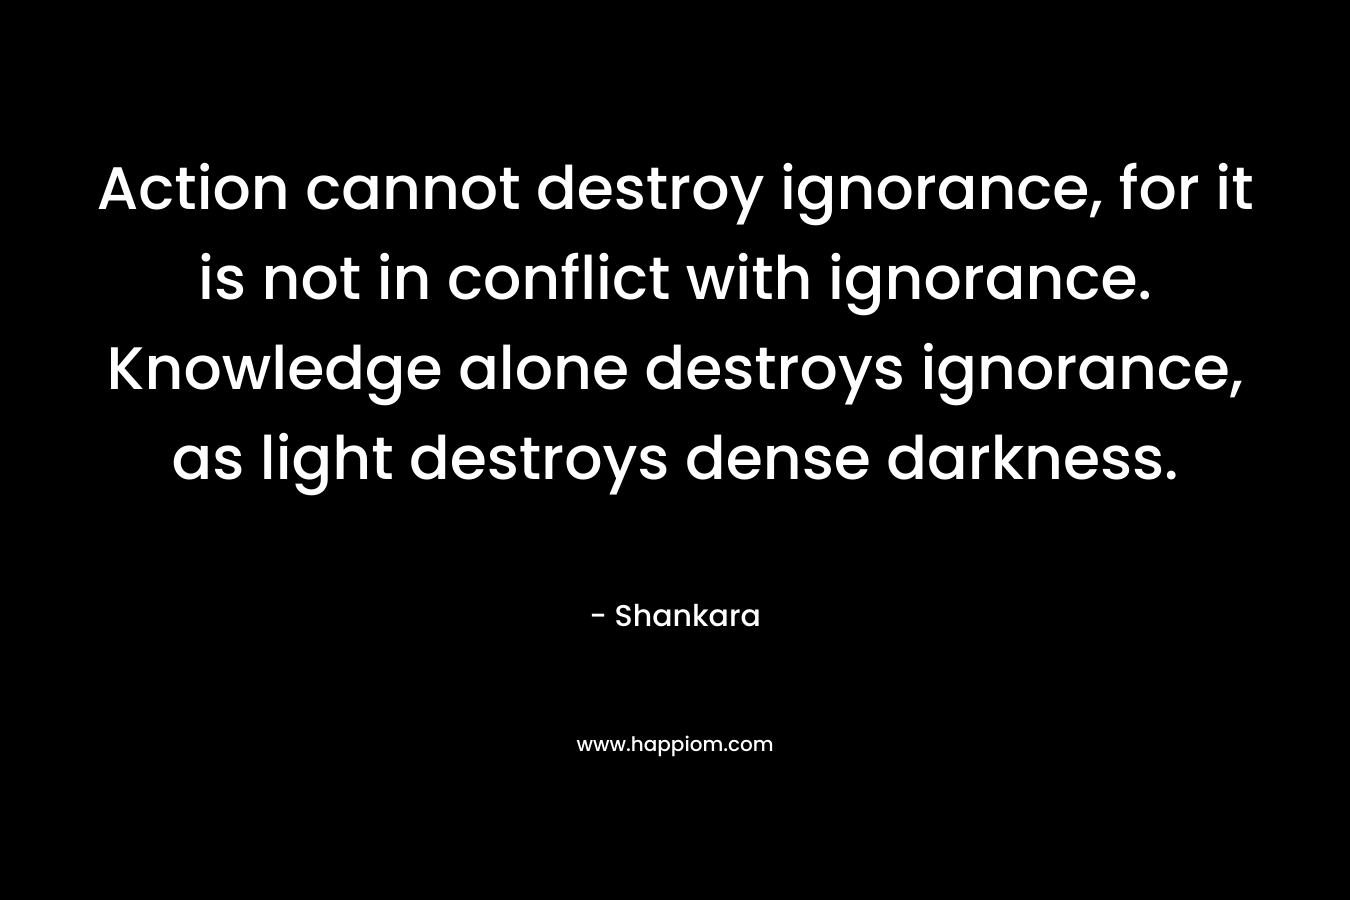 Action cannot destroy ignorance, for it is not in conflict with ignorance. Knowledge alone destroys ignorance, as light destroys dense darkness.